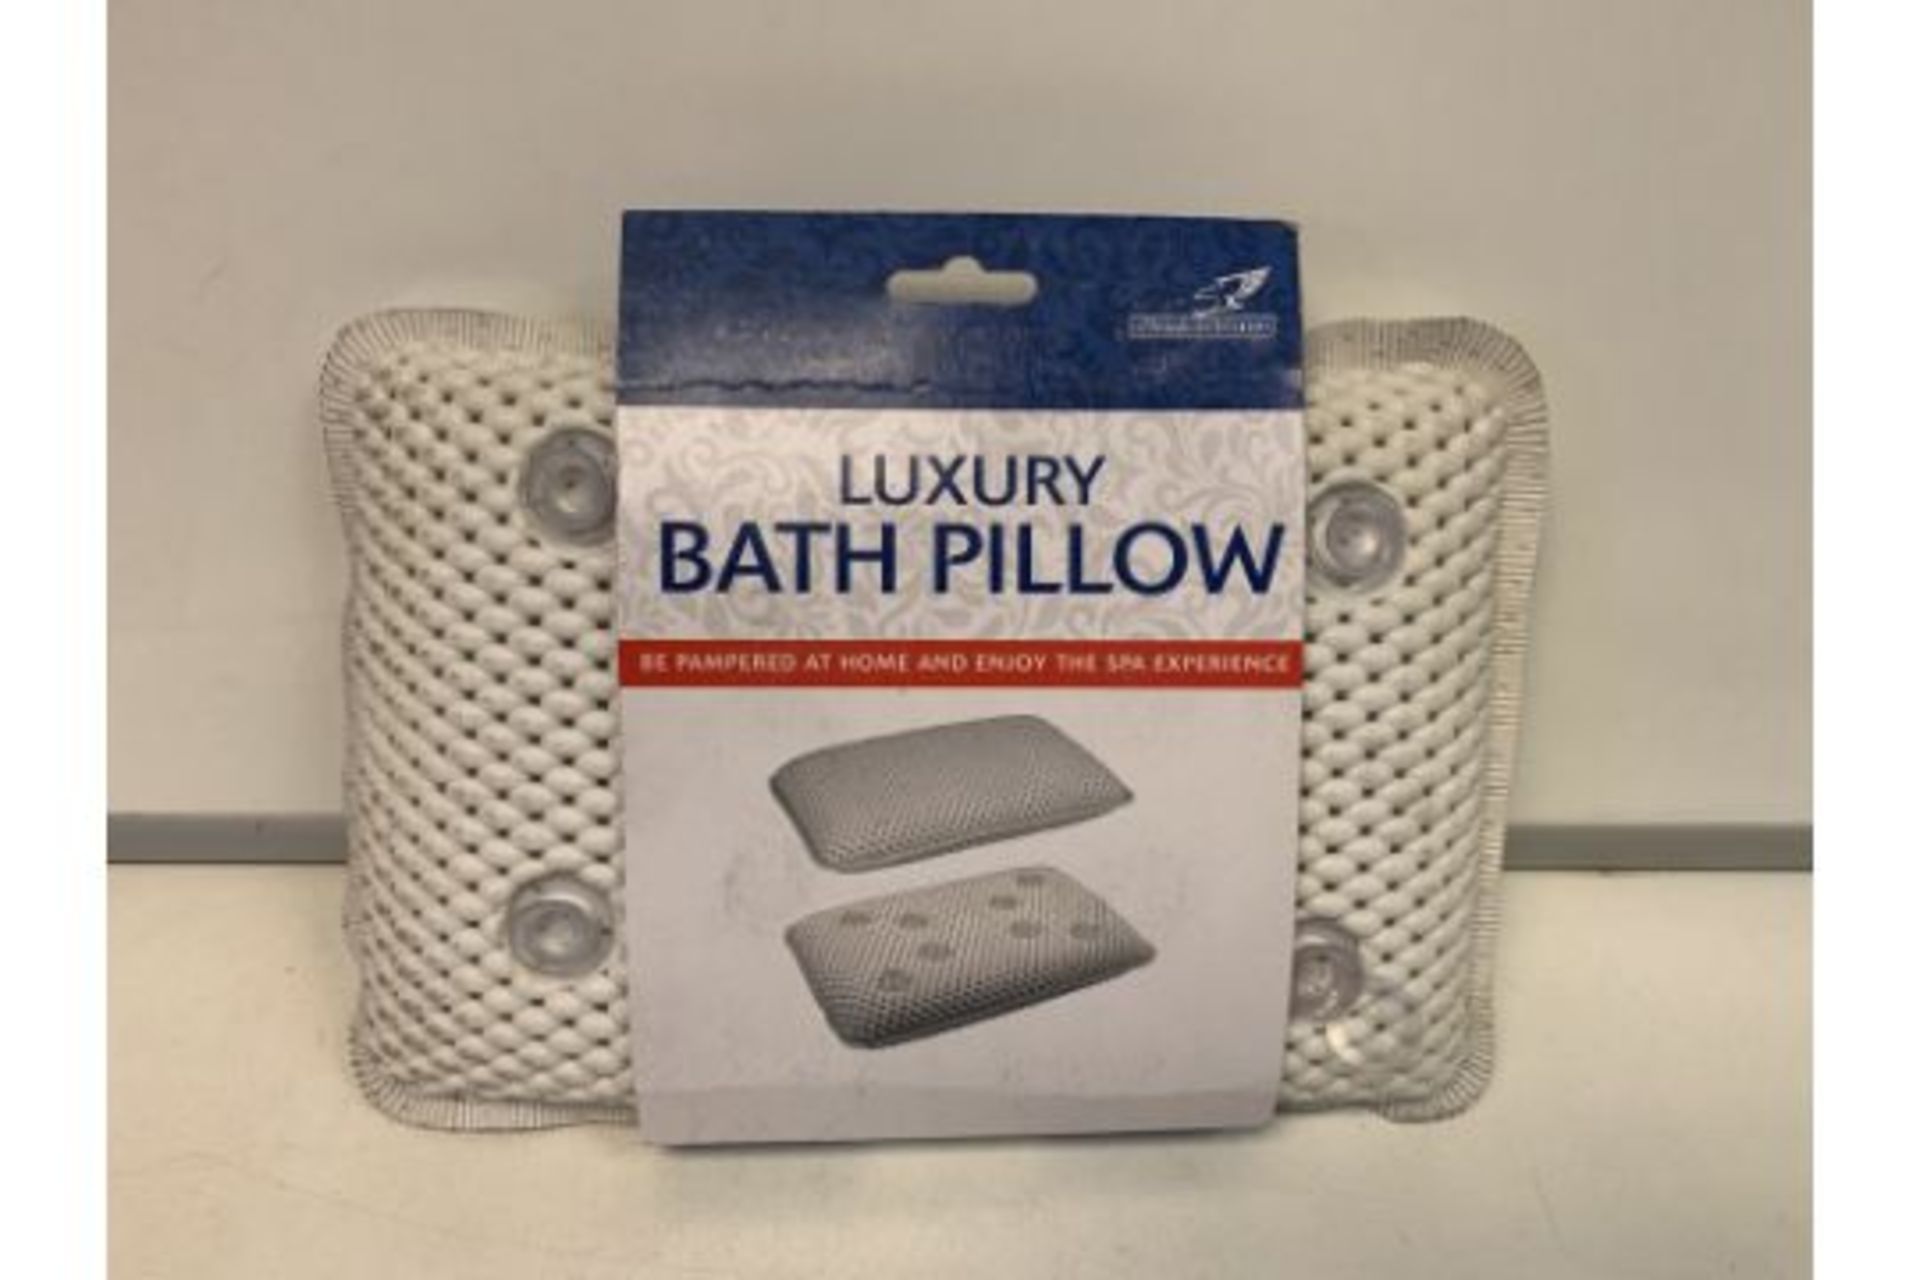 24 X NEW PACKAGED FALCON LUXURY BATH PILLOWS - BE PAMPERED AT HOME & ENJOY THE SPA EXPERIENCE